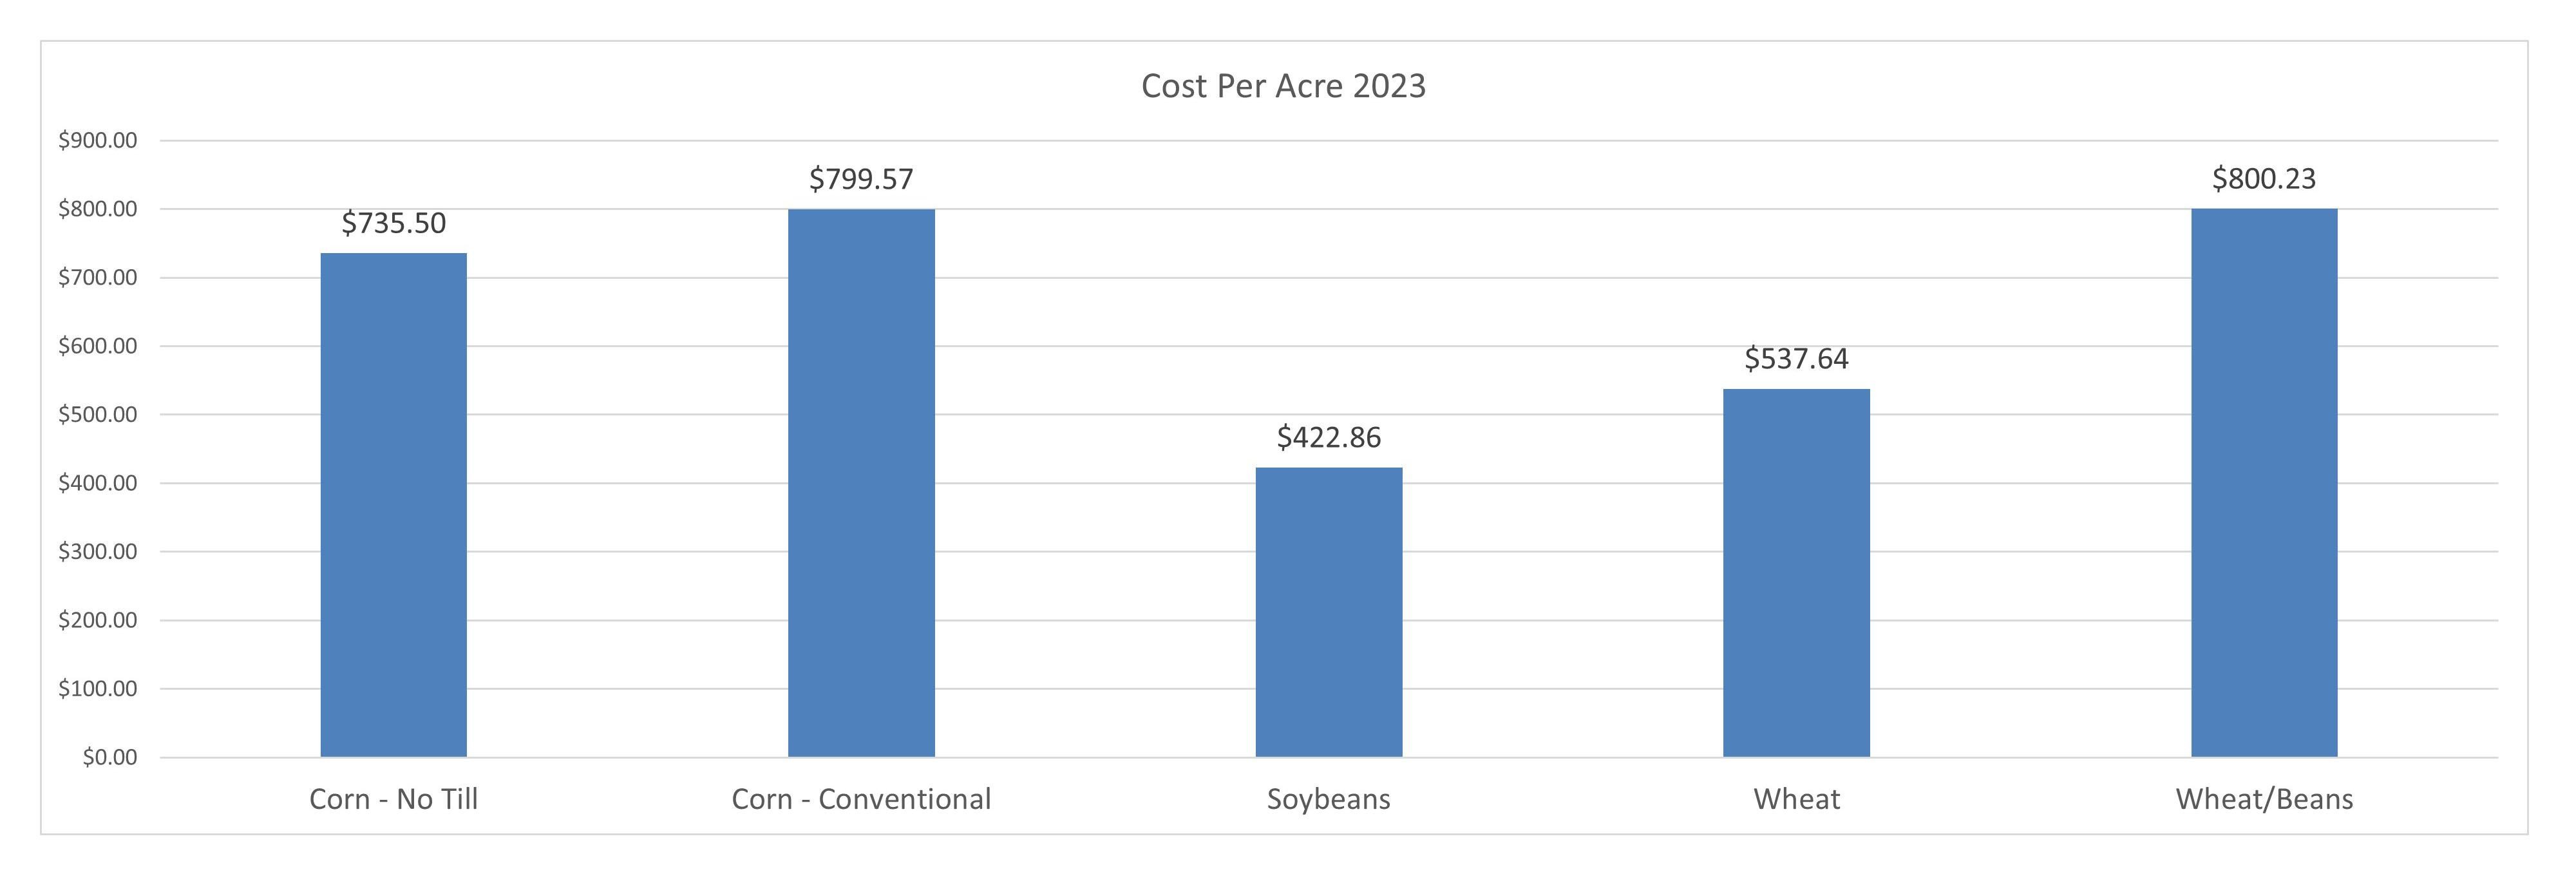 Bar graph showing the cost per acre in 2022 for corn-no till $692, corn-conventional $743, soybeans $396, wheat $485, and wheat and beans $739